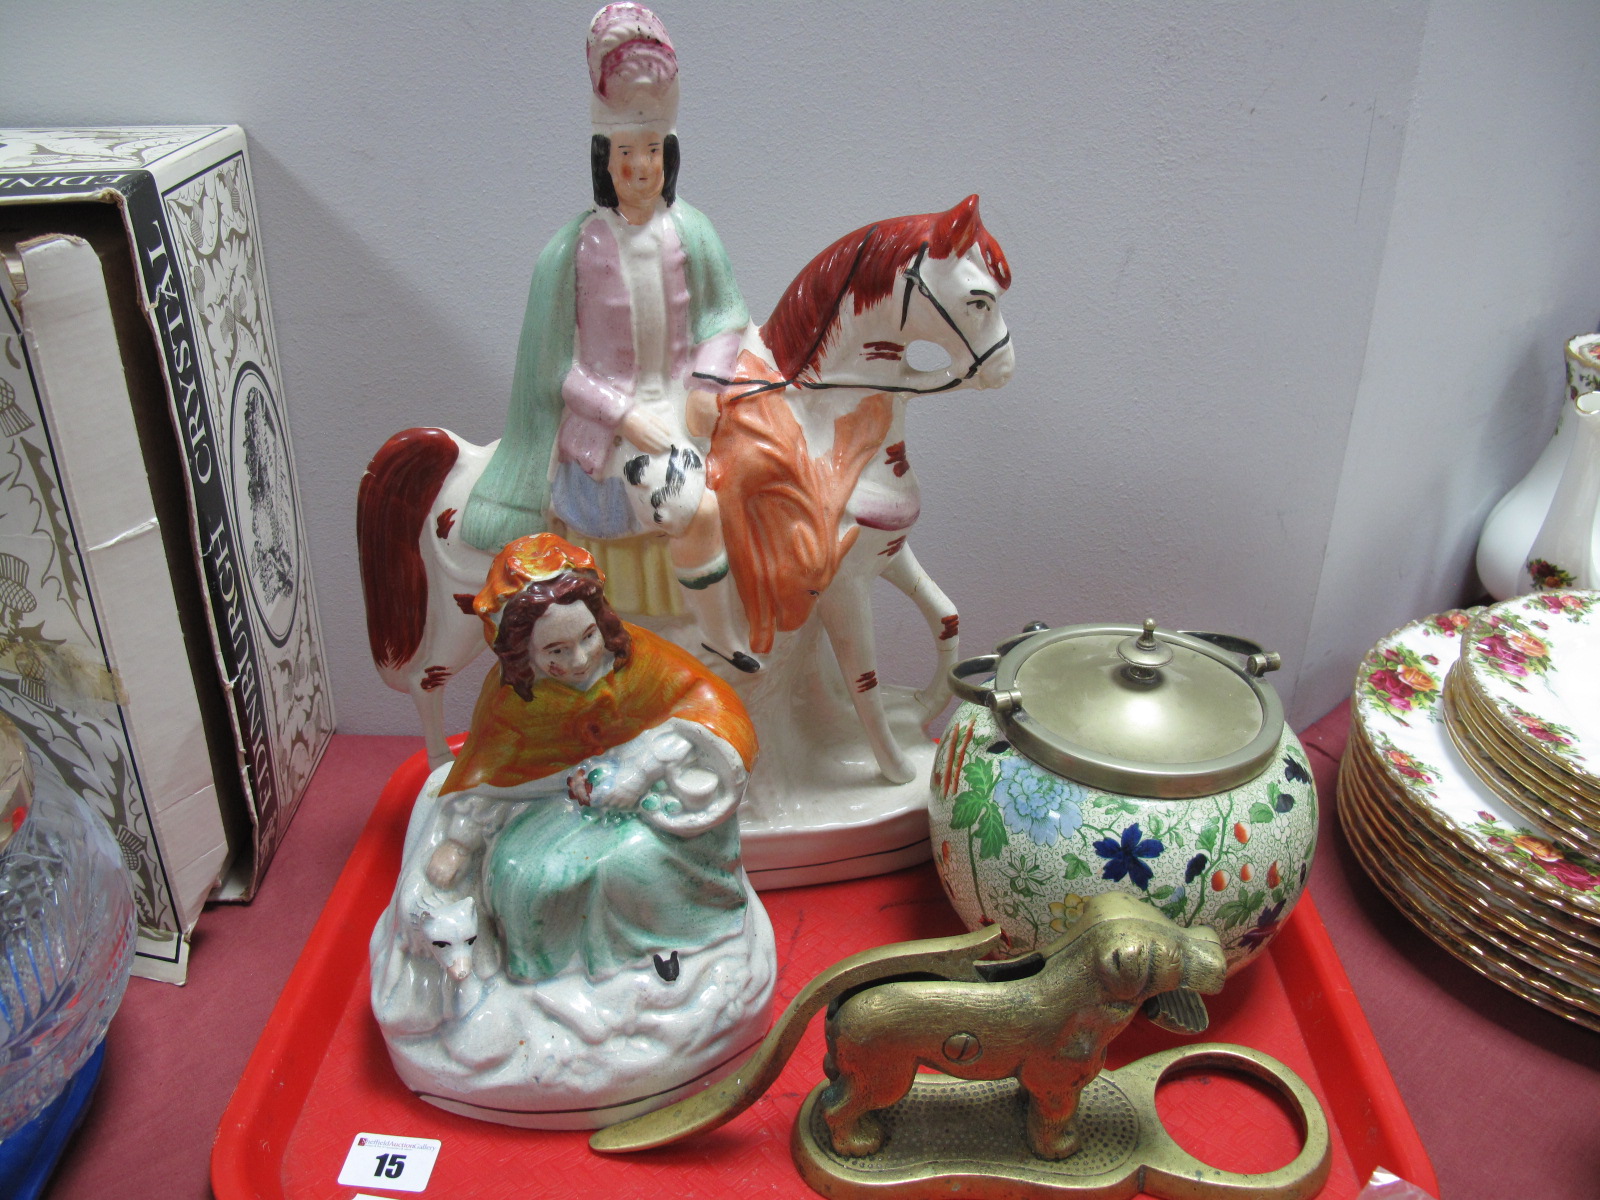 An Early XIX Century Flatback Equestrian Figure, Red Riding Hood figure, Ye Old Dresden biscuit